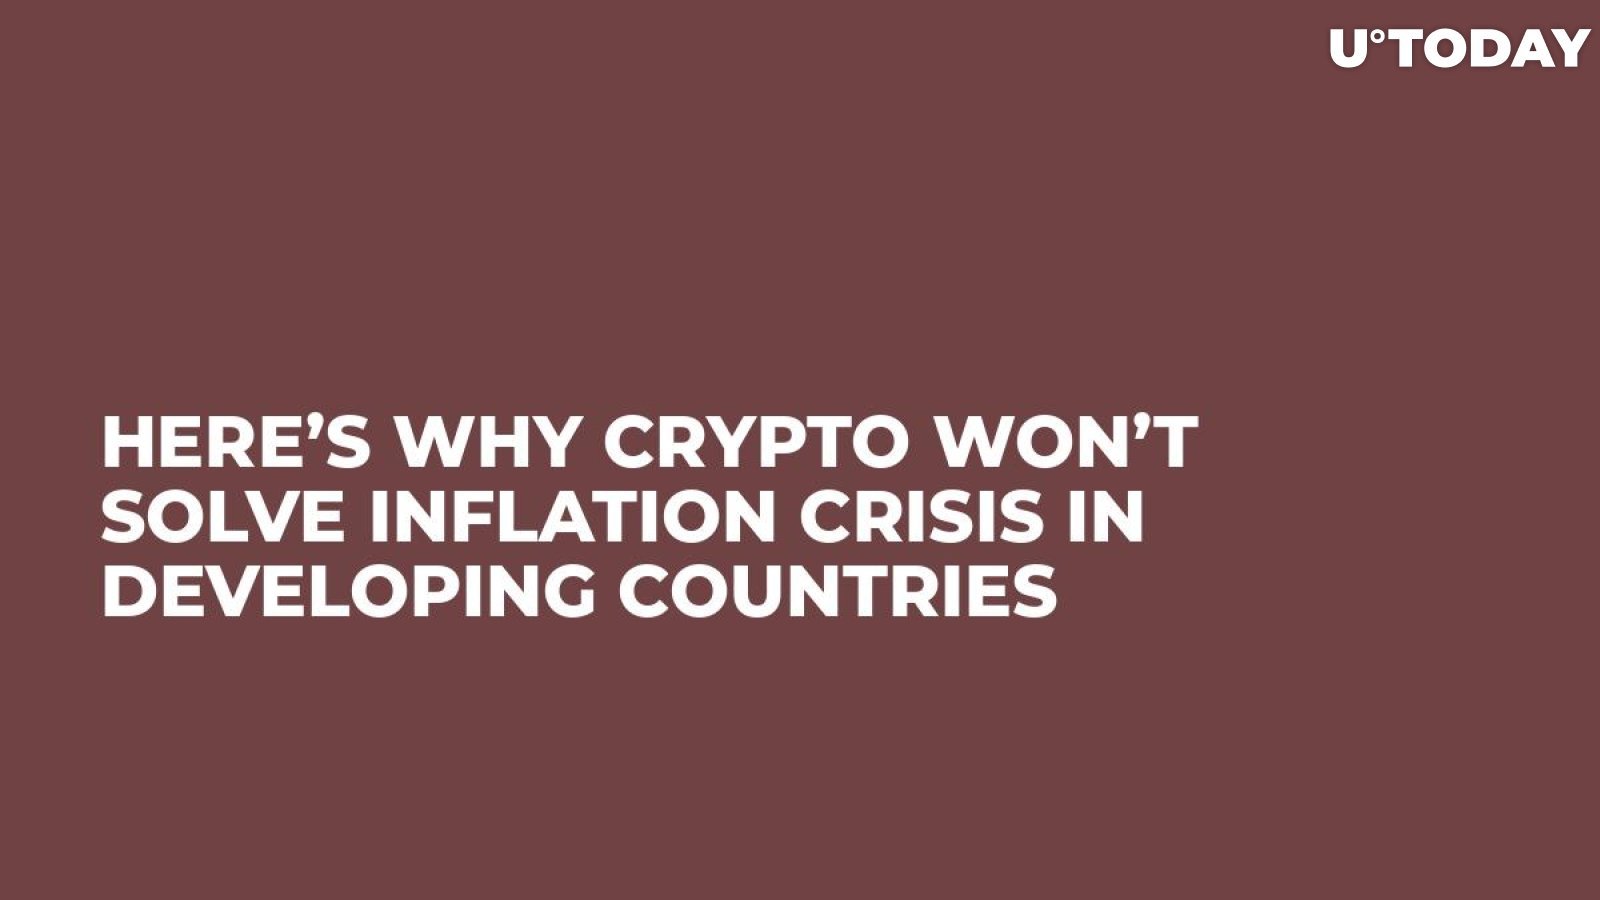 Here’s Why Crypto Won’t Solve Inflation Crisis in Developing Countries 